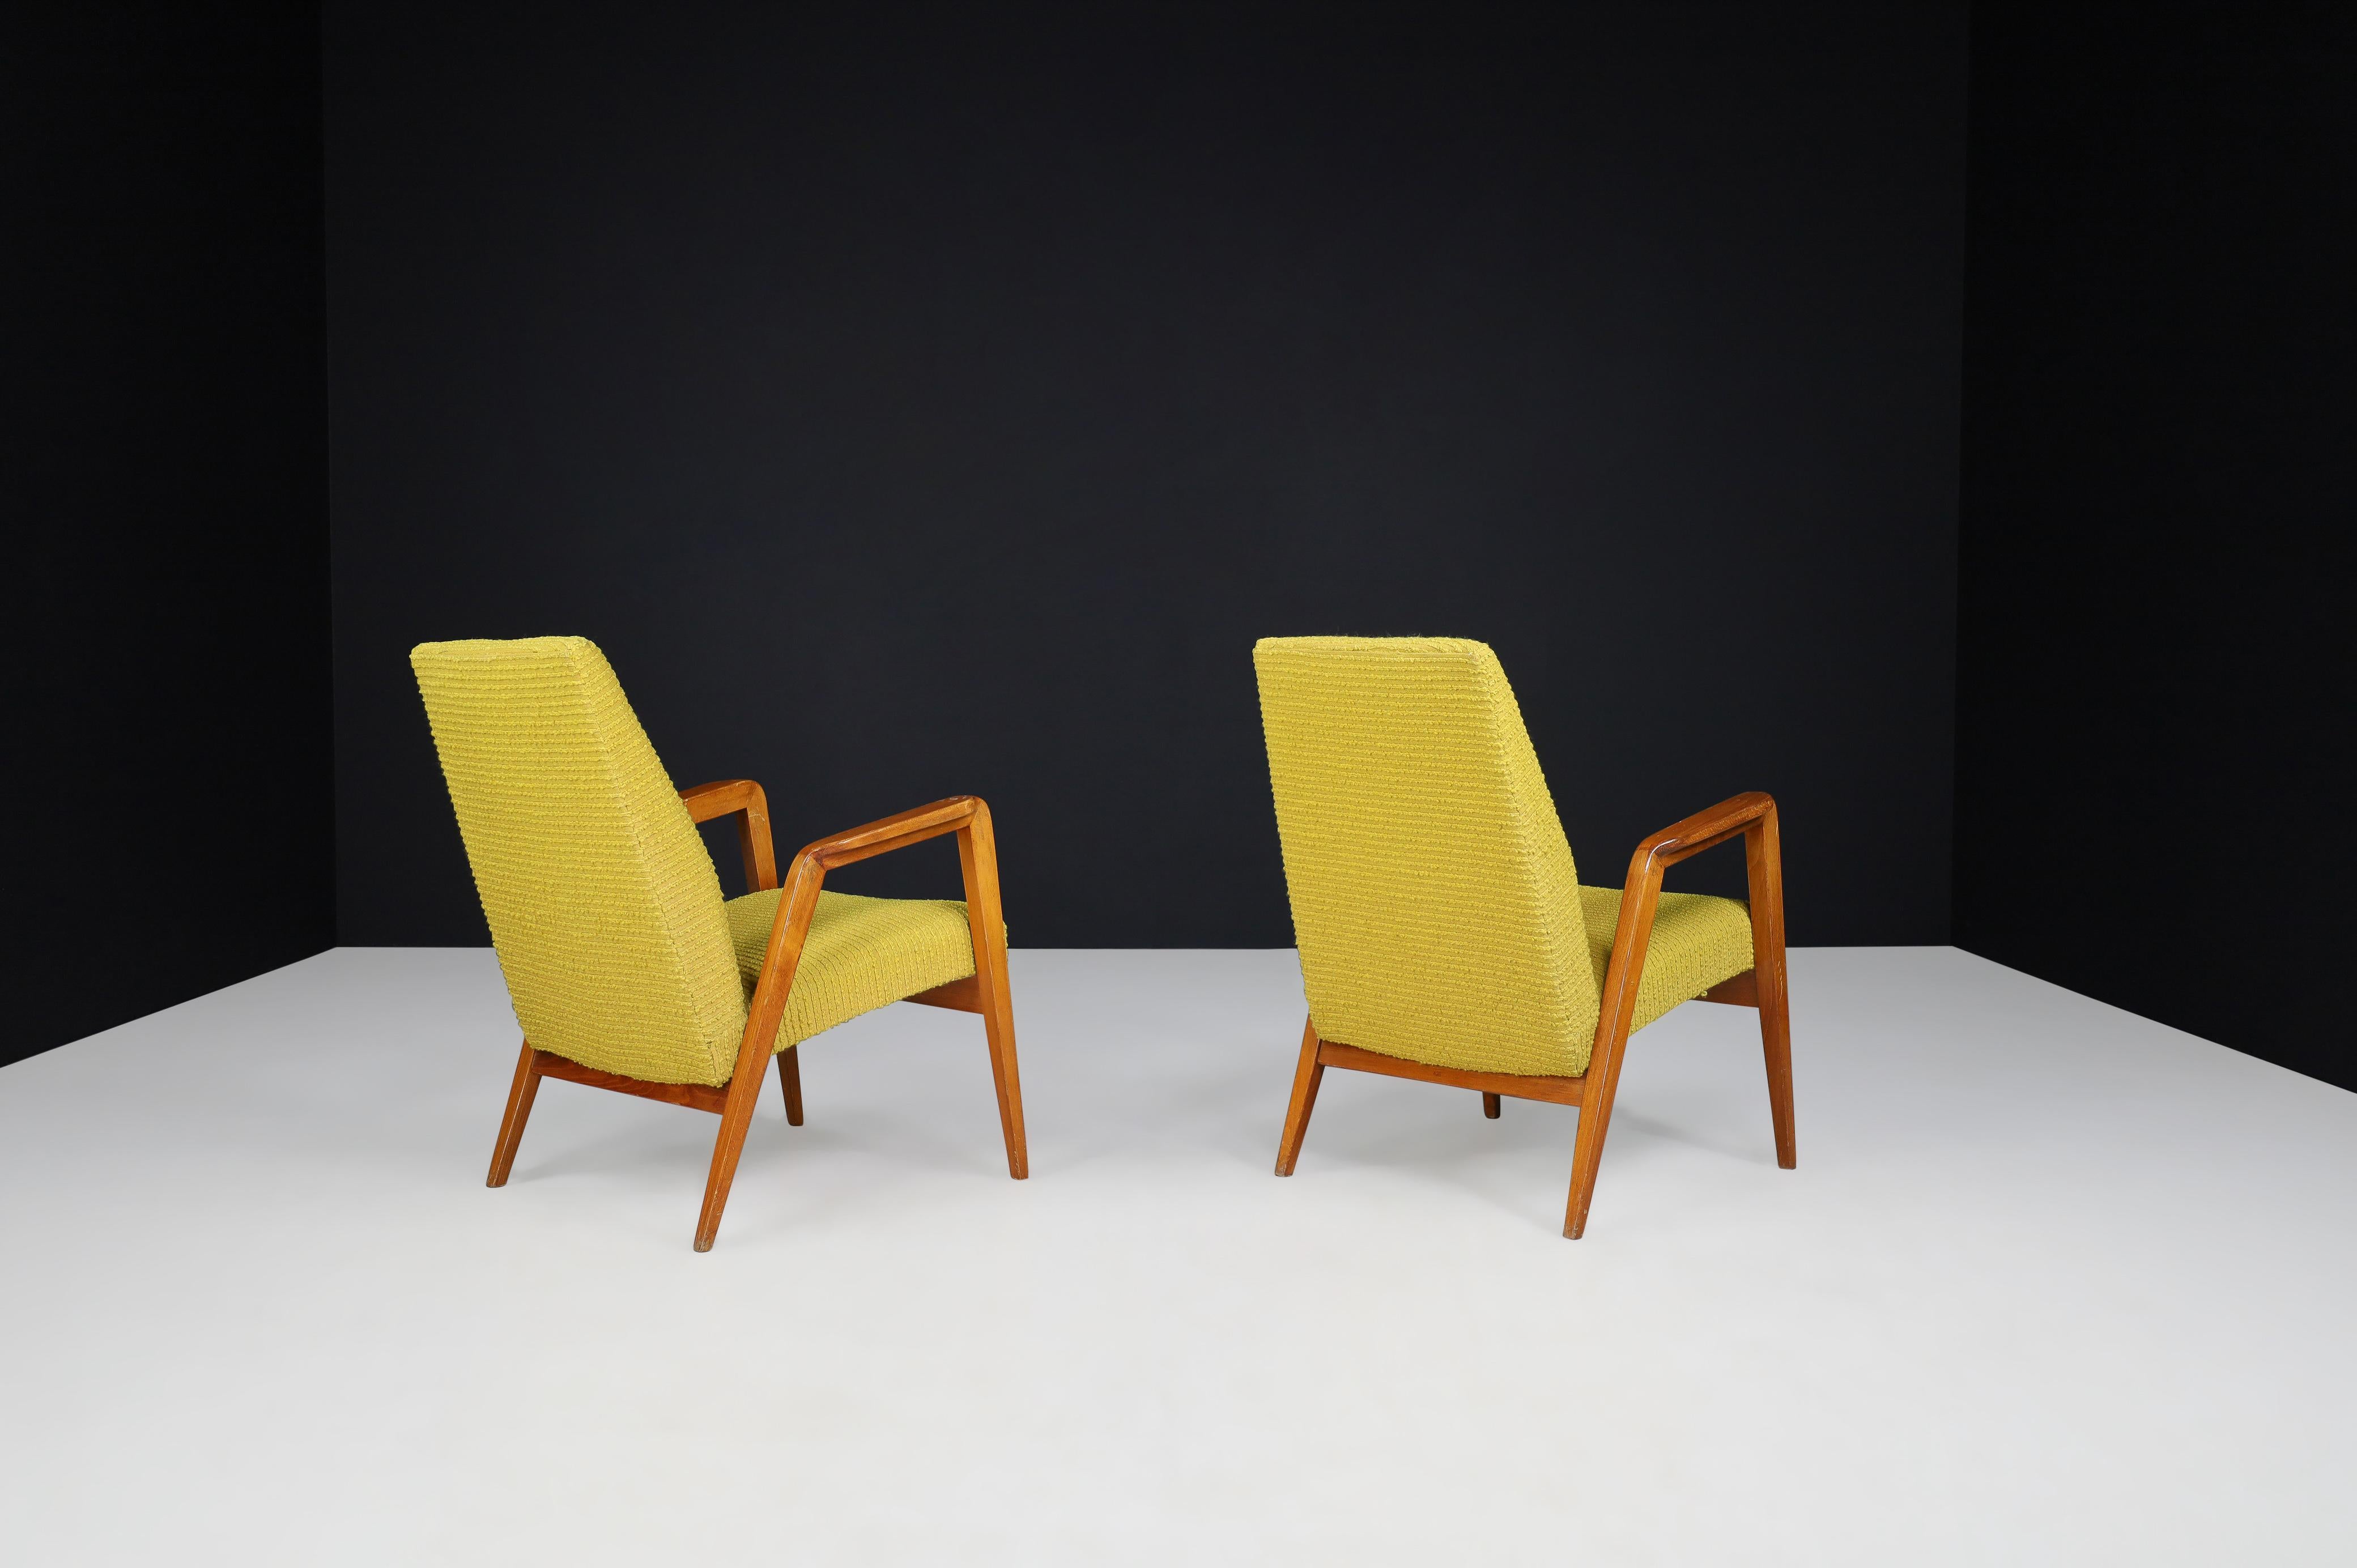 Fabric Mid-Century Modern Lounge Chairs in Original Lemon Upholstery, Praque 1950s  For Sale